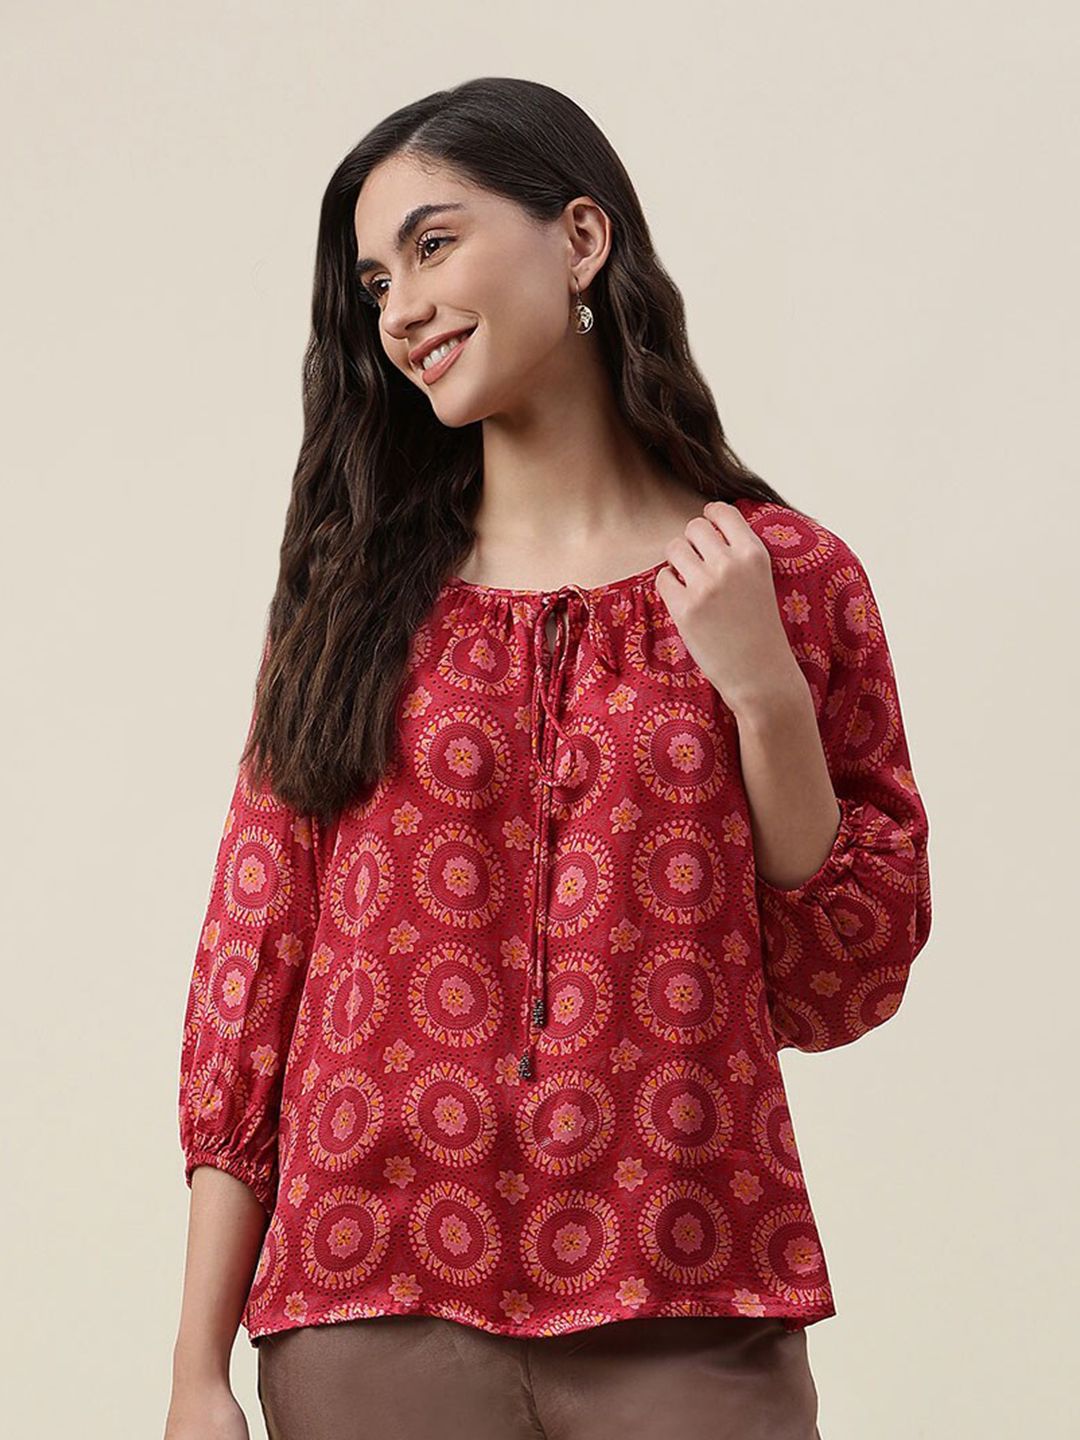 Fabindia Red Floral Print Tie-Up Neck Top Price in India